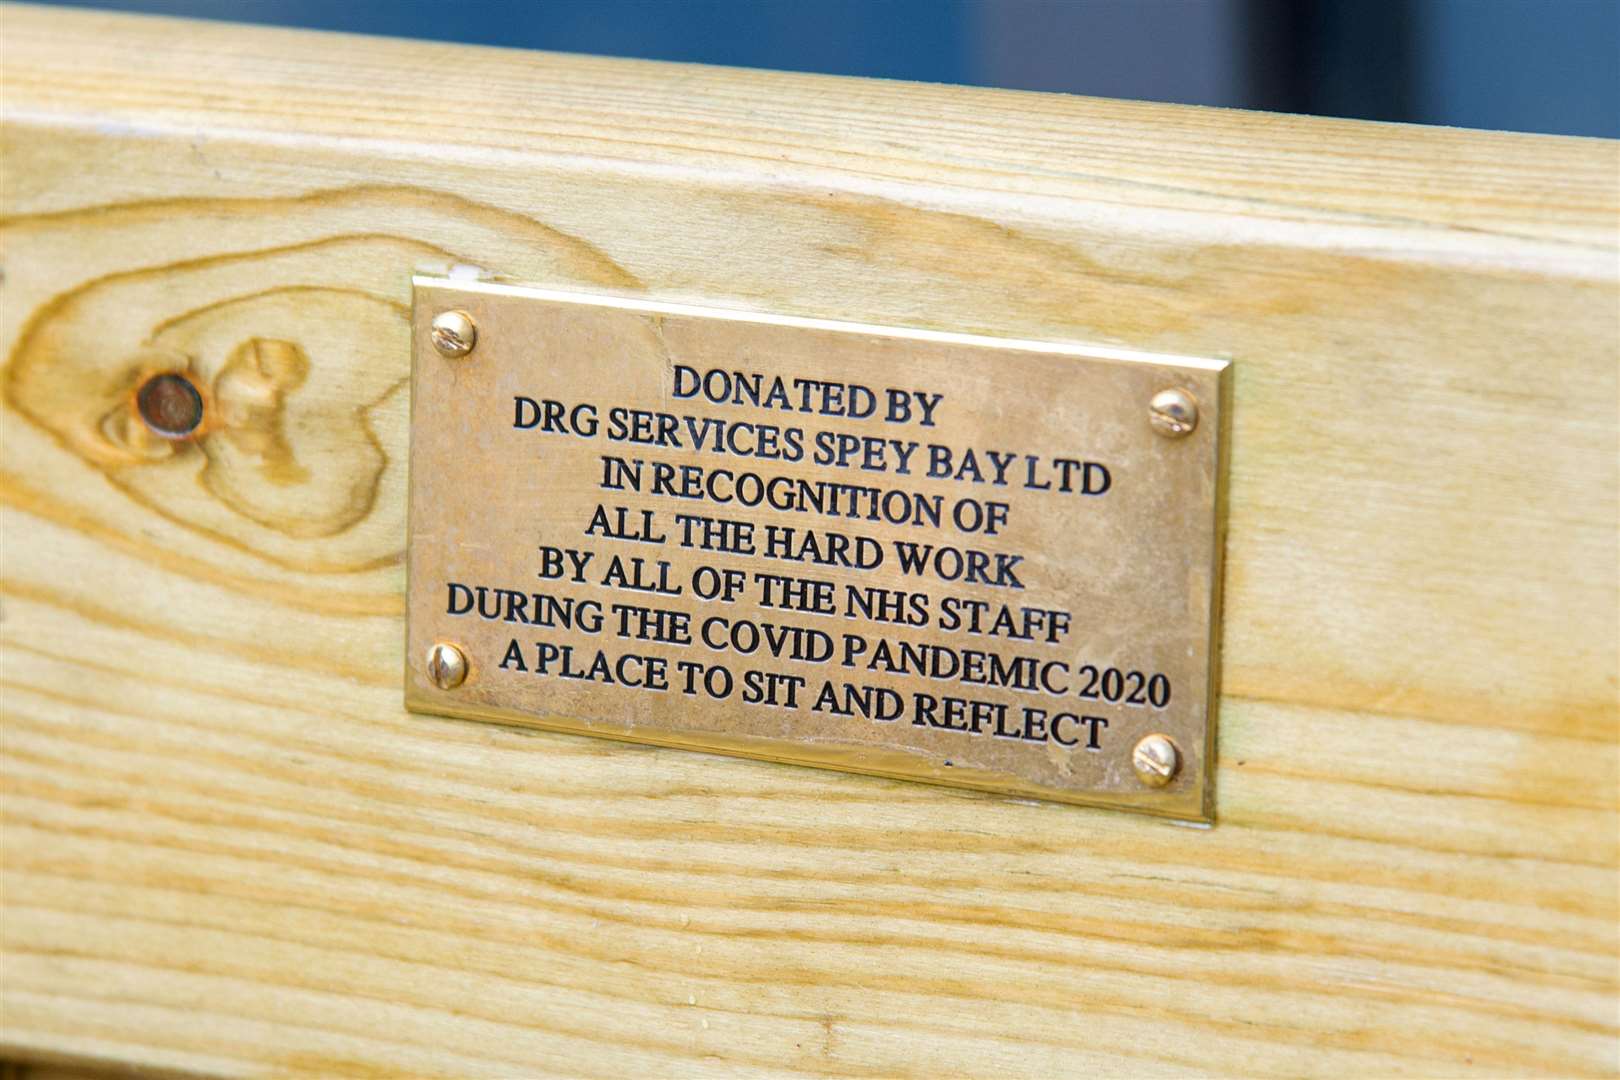 DRG Services Spey Bay set £10 aside from each sale for a spell during the coronavirus lockdown to buy the new bench, inscribed with a plaque, for Dr Gray's sensory garden. Picture: Daniel Forsyth.